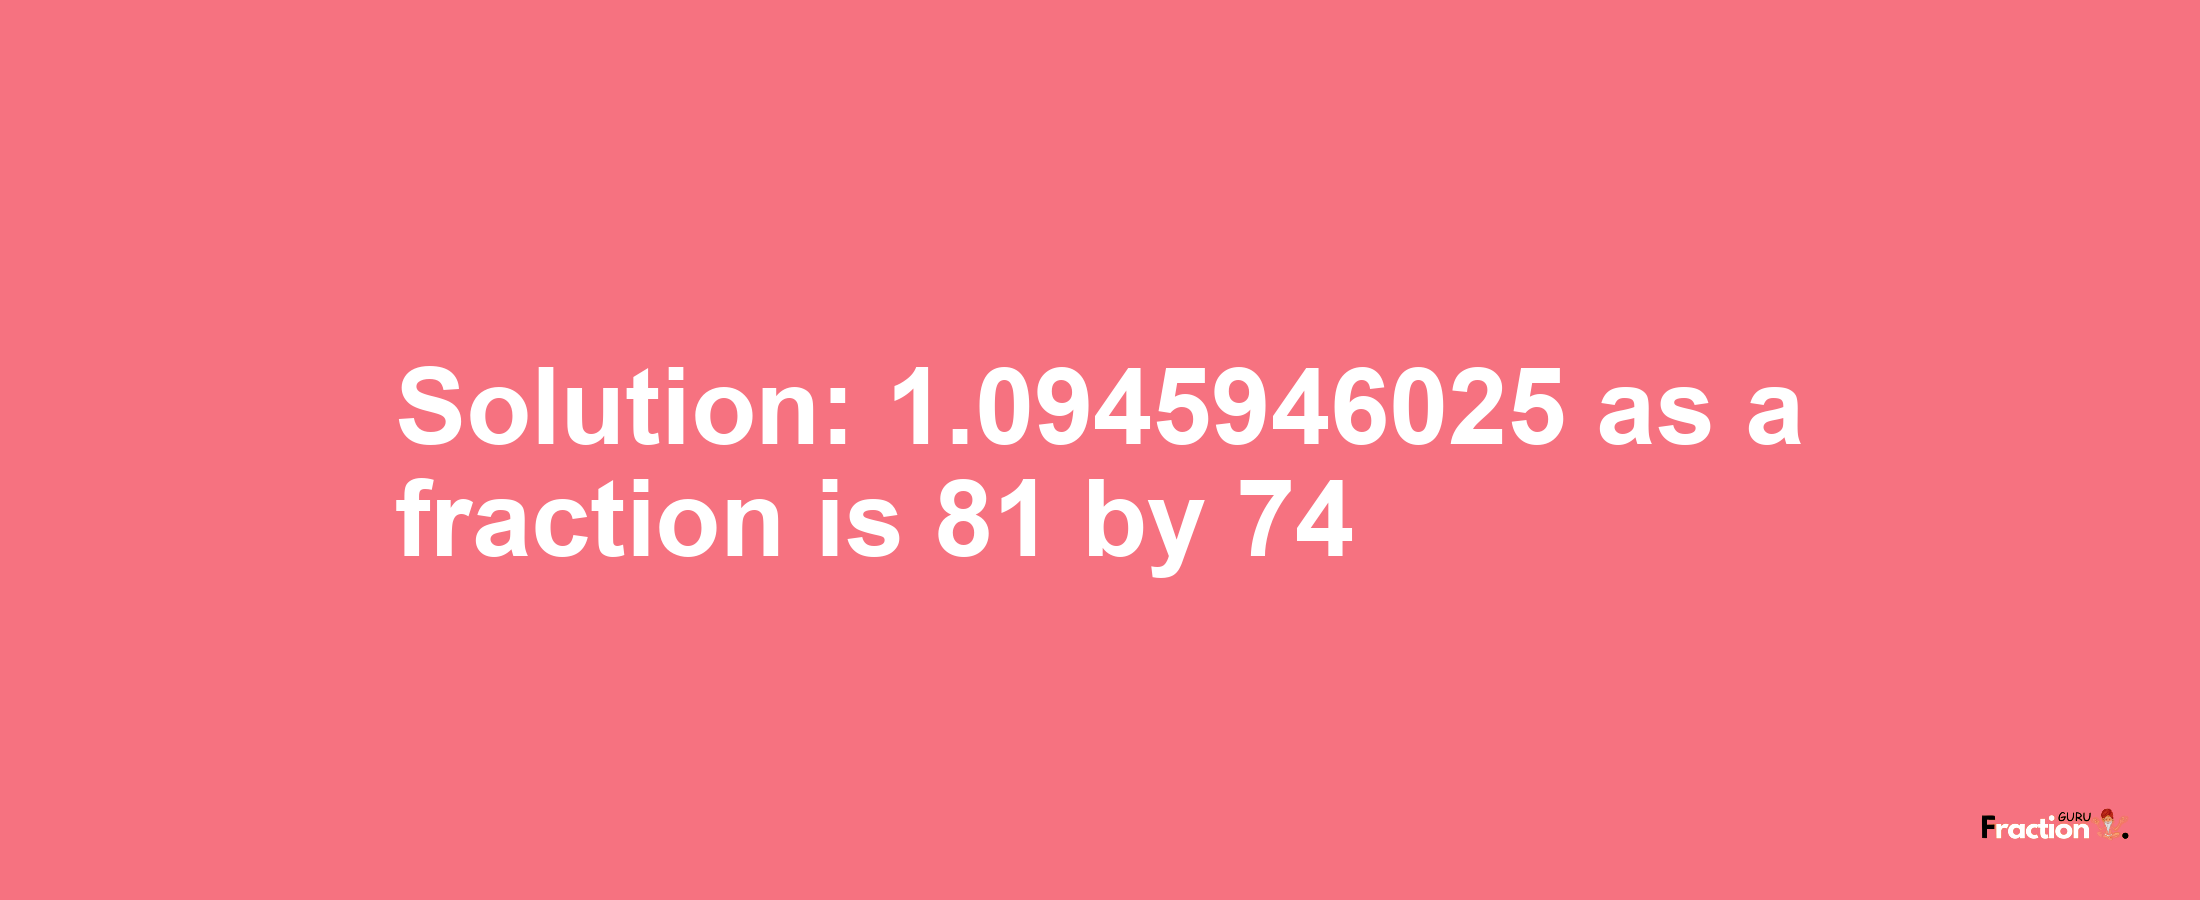 Solution:1.0945946025 as a fraction is 81/74